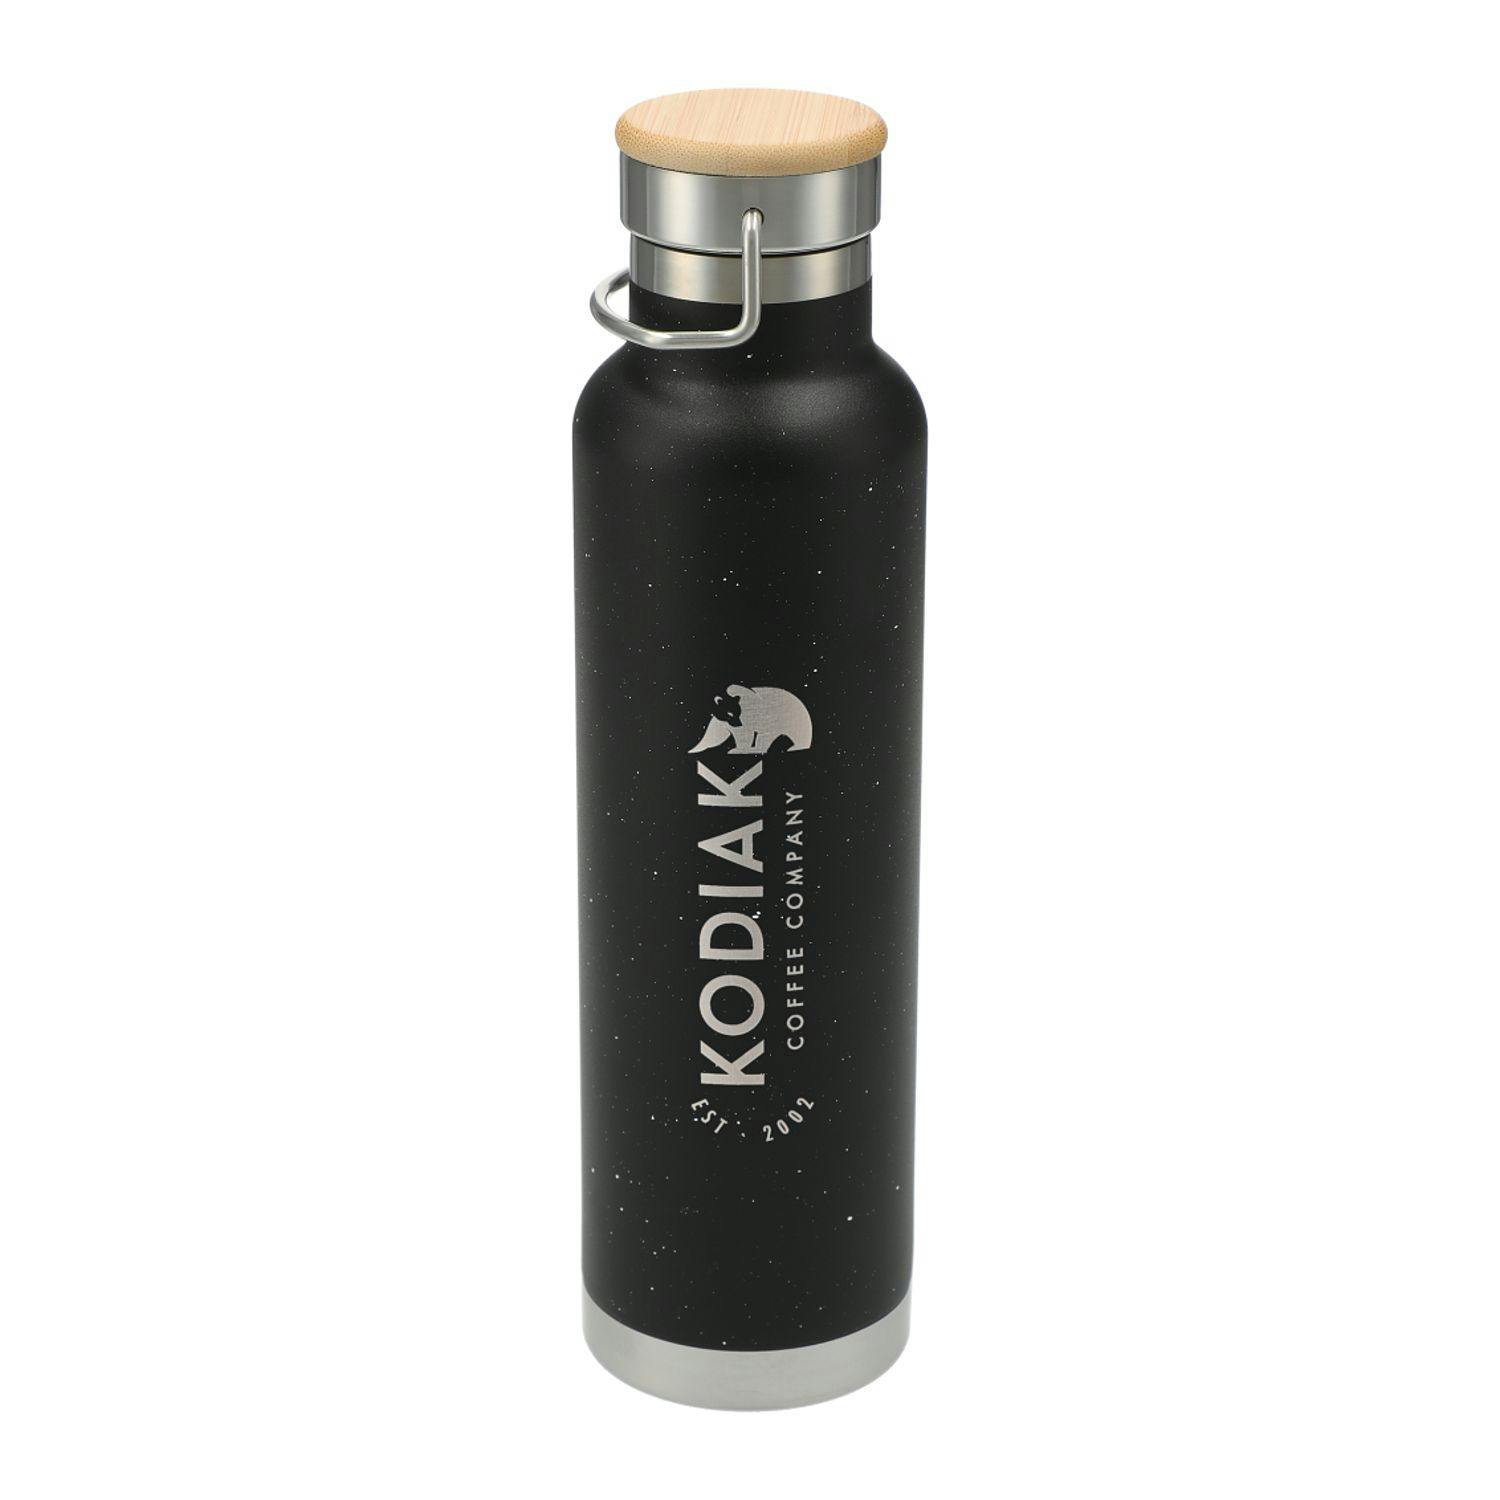 Speckled Thor Copper Vacuum Insulated Bottle 22oz - additional Image 1